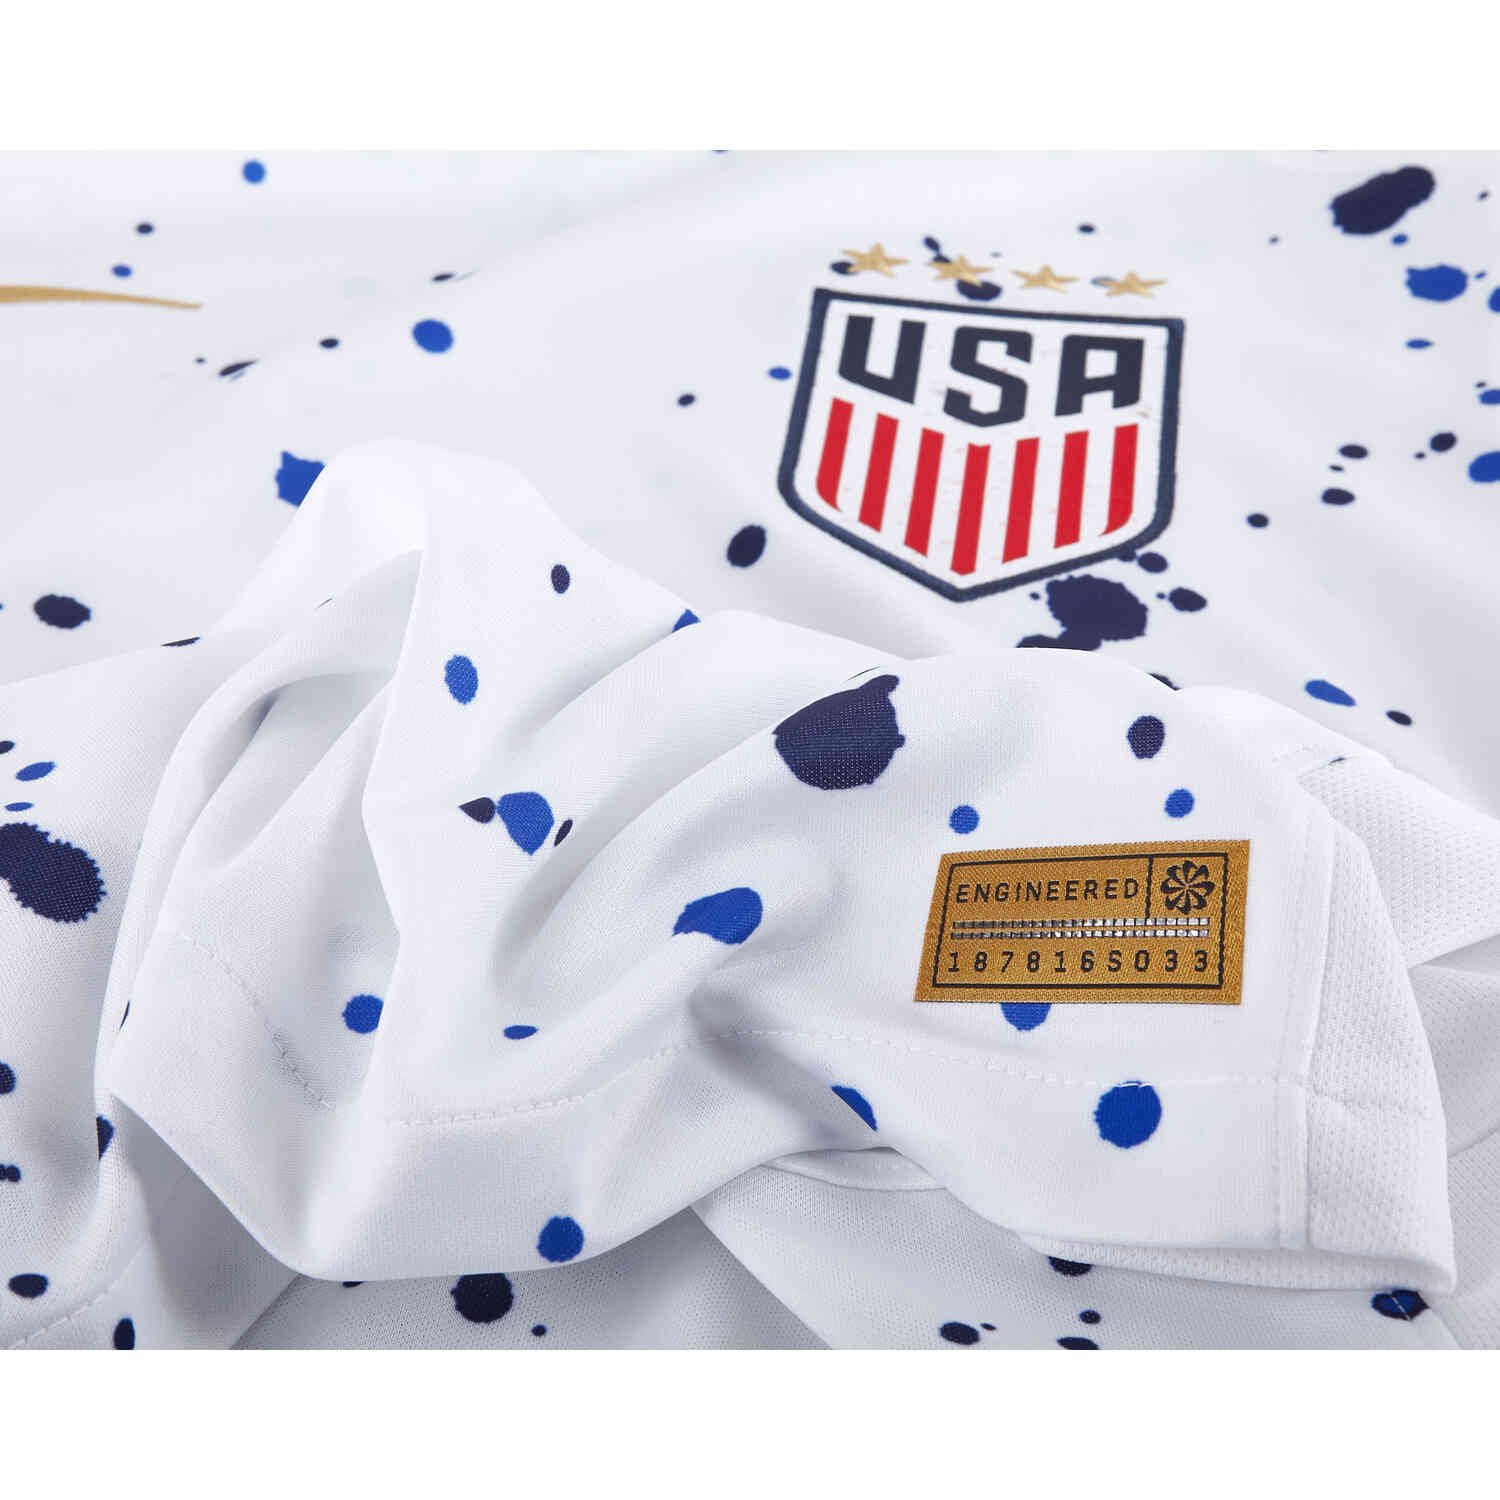 Trinity Rodman USWNT 2023 Authentic Home Jersey by Nike